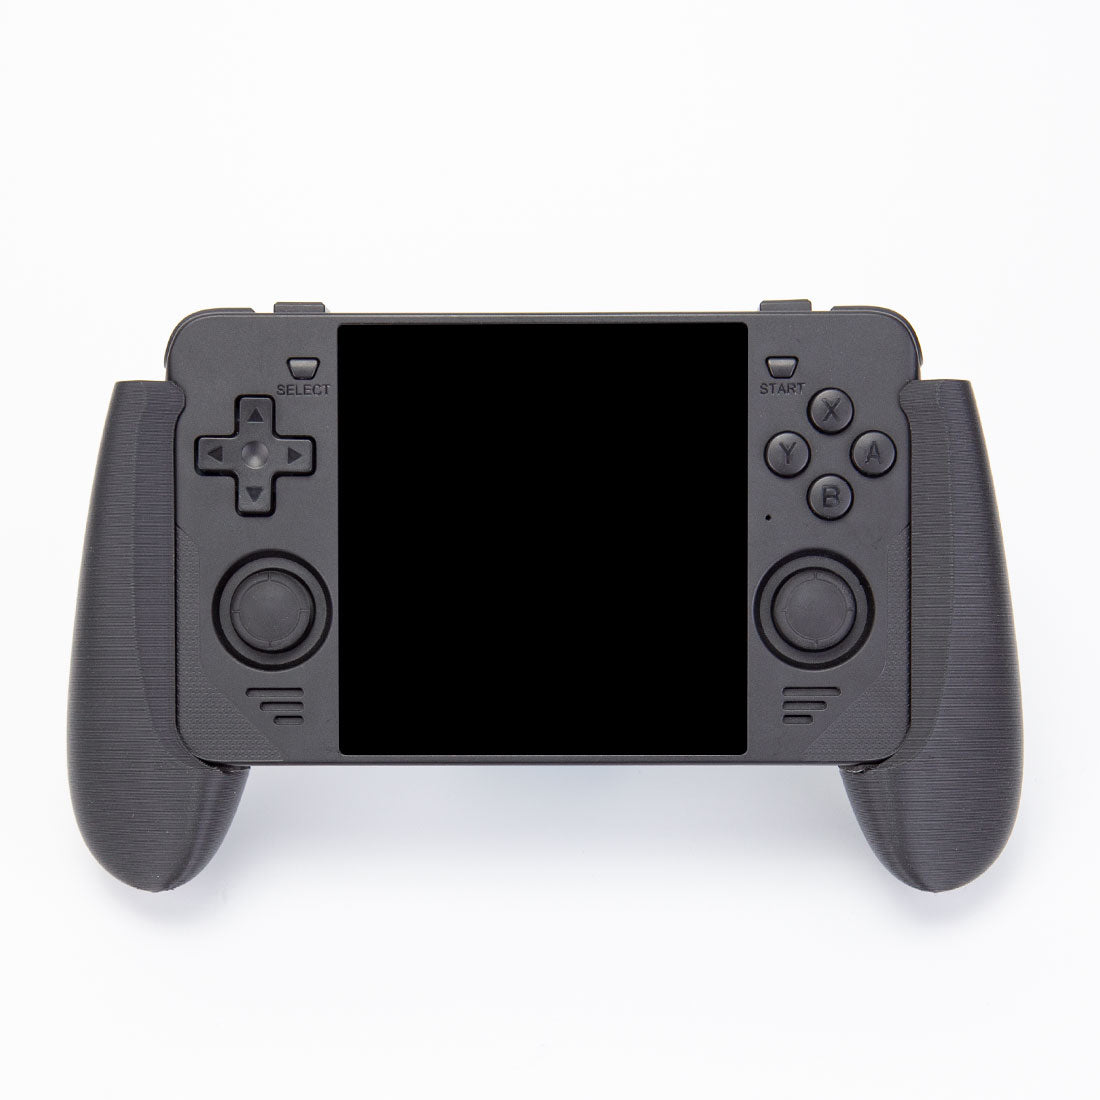 litnxt-3D-printed-handheld-for-powkiddy-rgb30-game-console-black-3